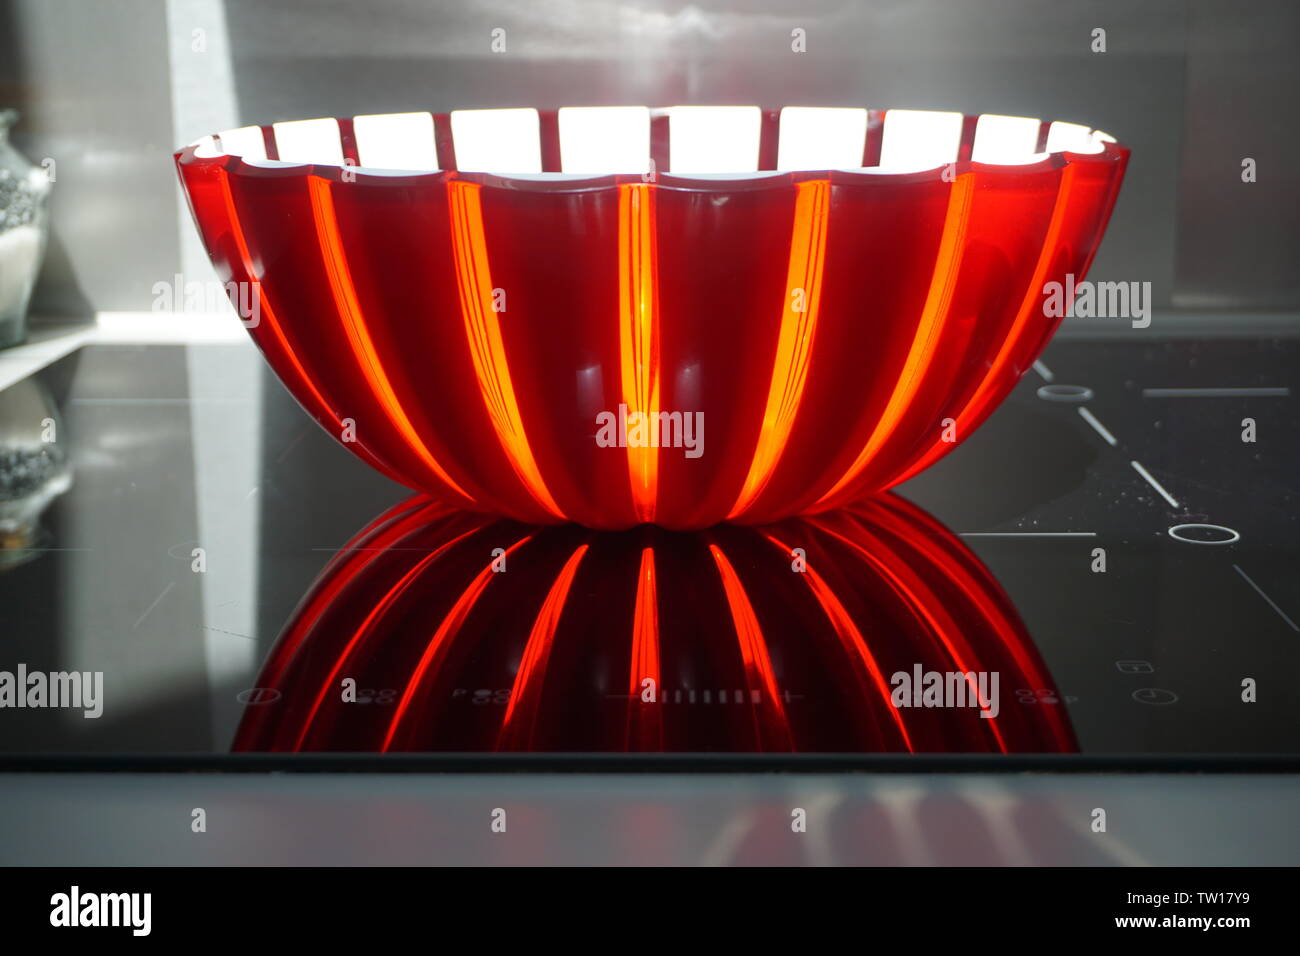 sun shining through a red and white plastic bowl on the stove Stock Photo